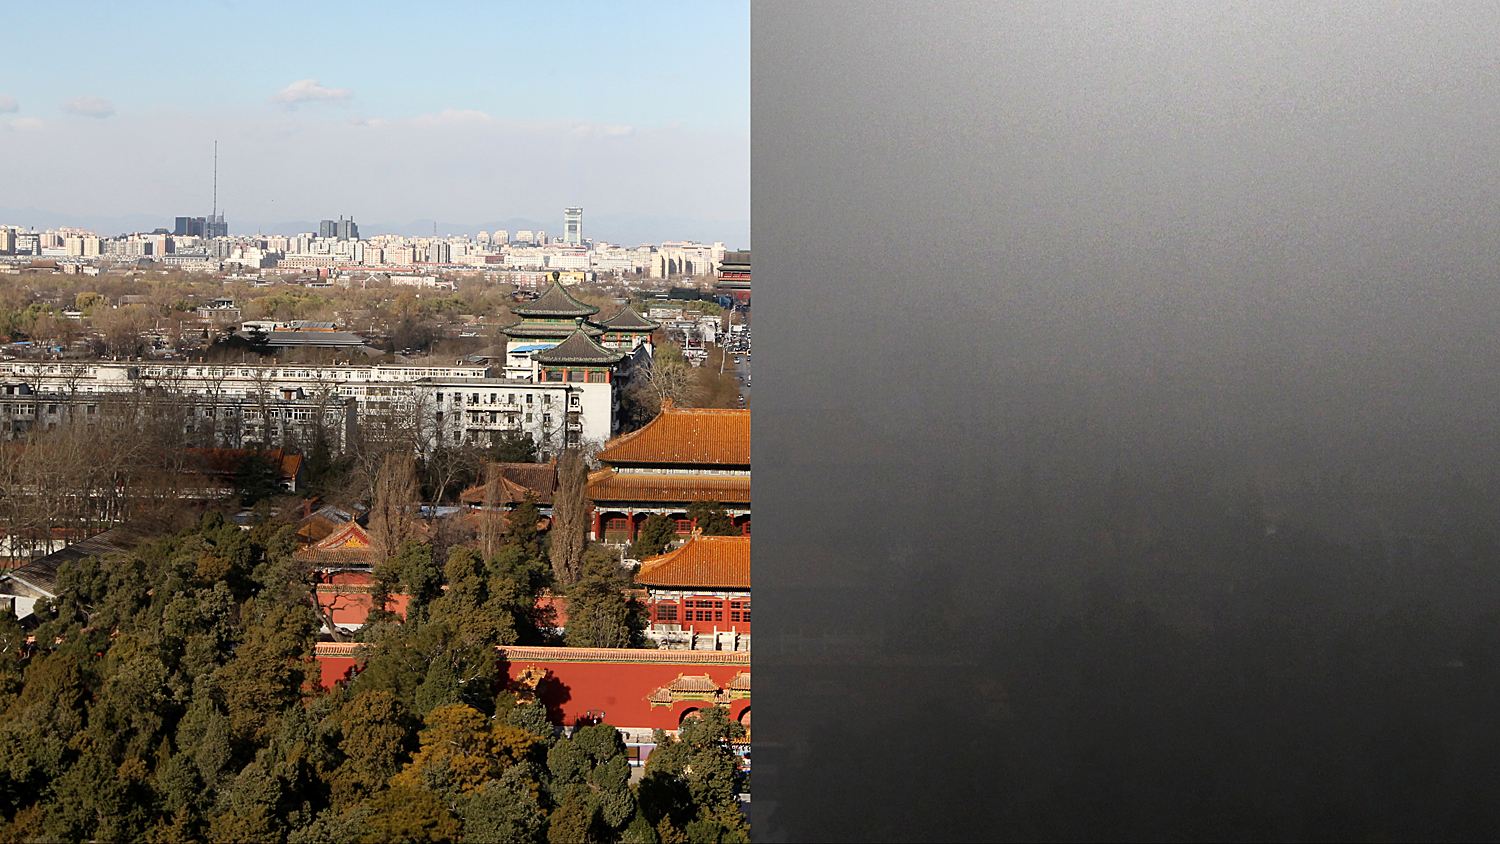 A combo photo shows a view of the Forbidden City from the top of Jingshan Park, in which the city is under blue sky (left) on December 2, and covered by serious smog on December 1 (right). Photo: Simon Song